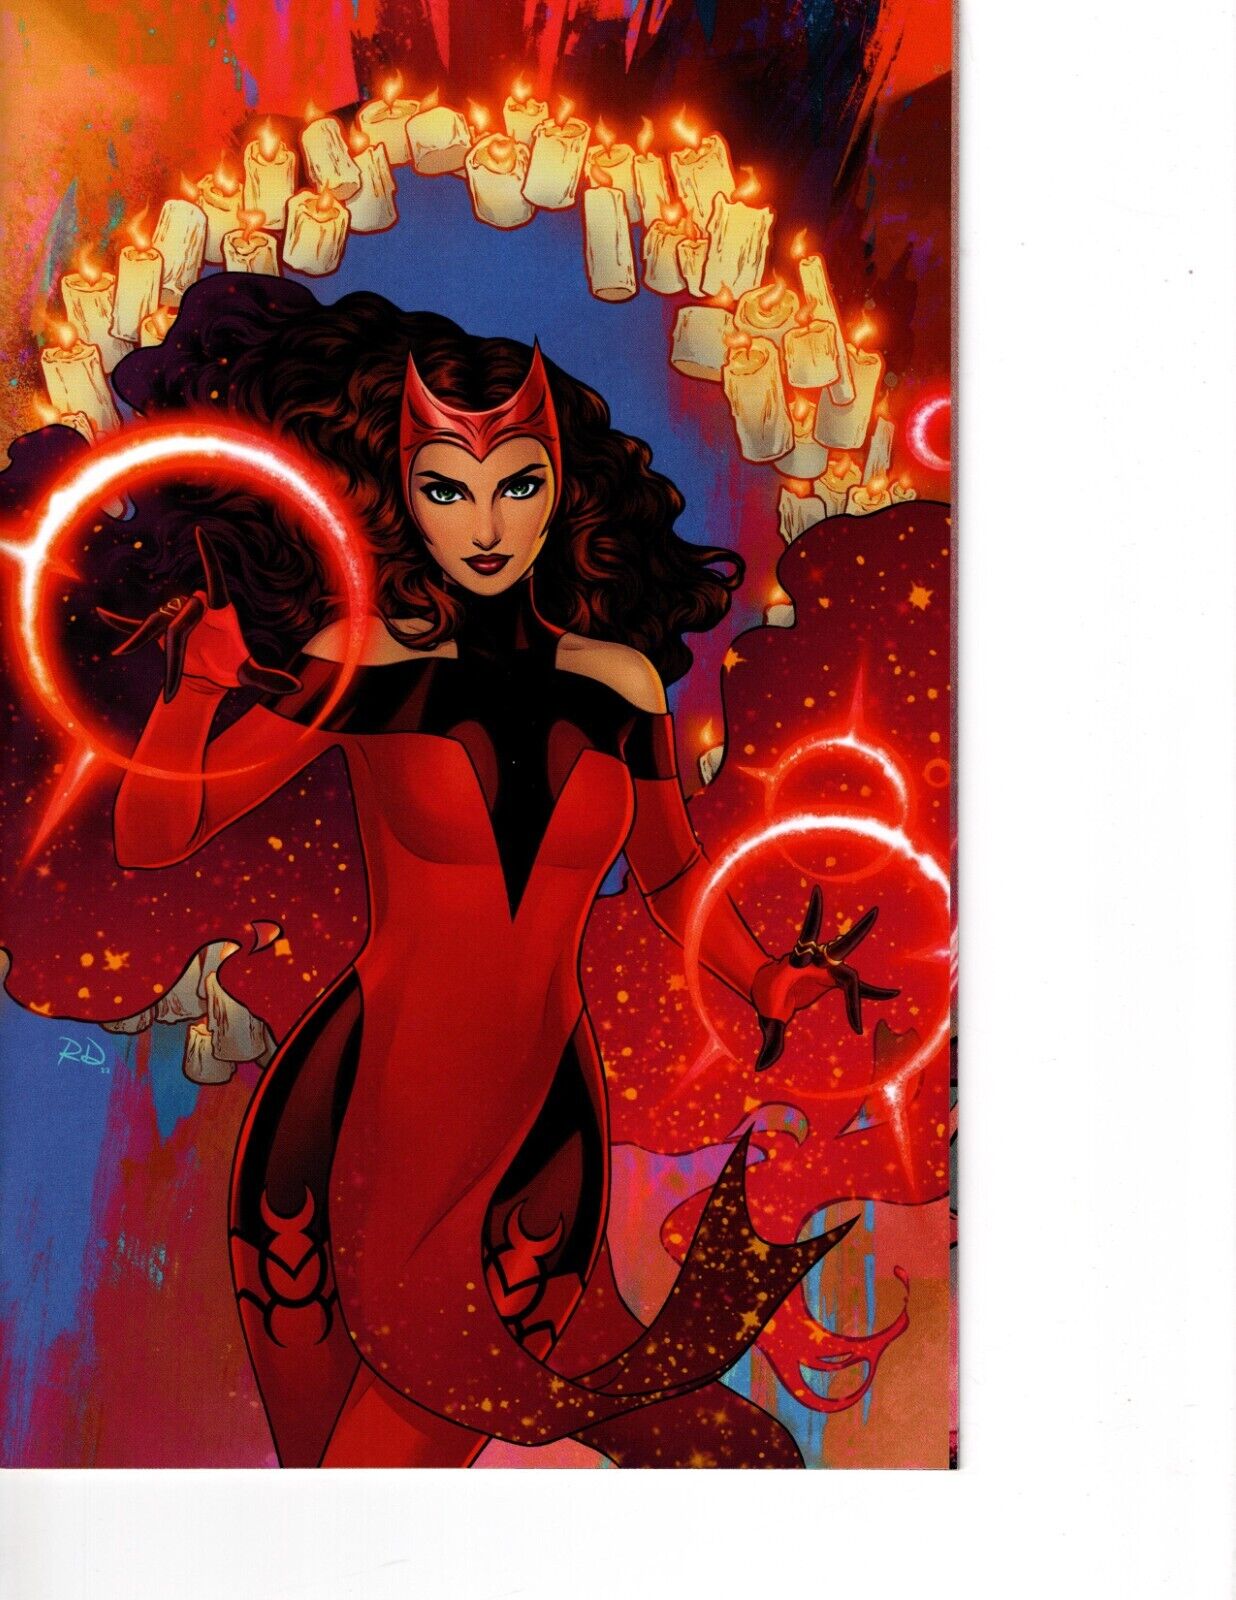 Scarlet Witch  Scarlet witch comic, Marvel comic character, Marvel  superhero posters